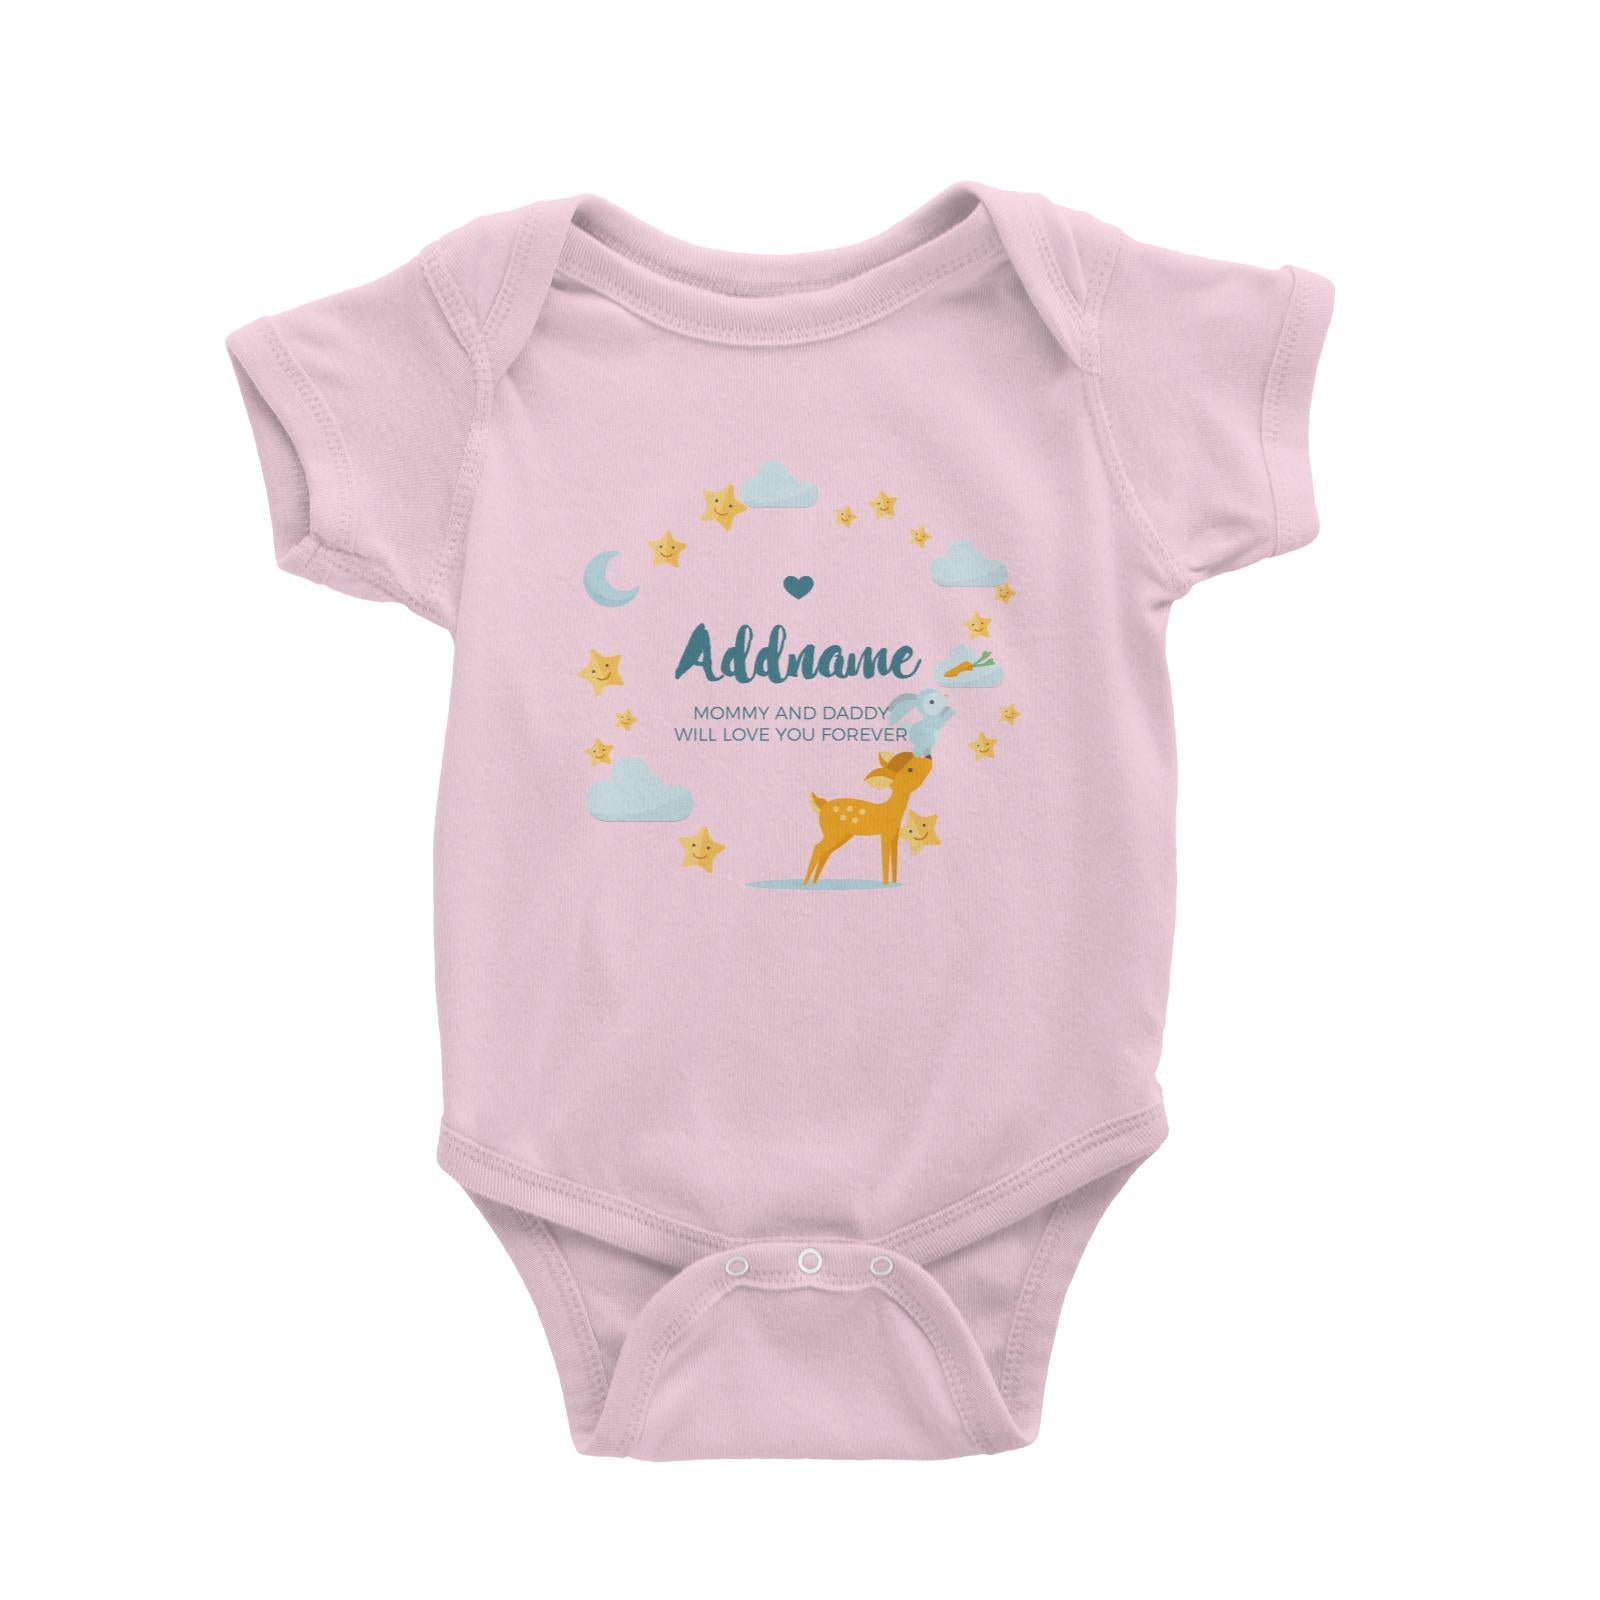 Cute Deer and Rabbit with Star and Moon Elements Personalizable with Name and Text Baby Romper